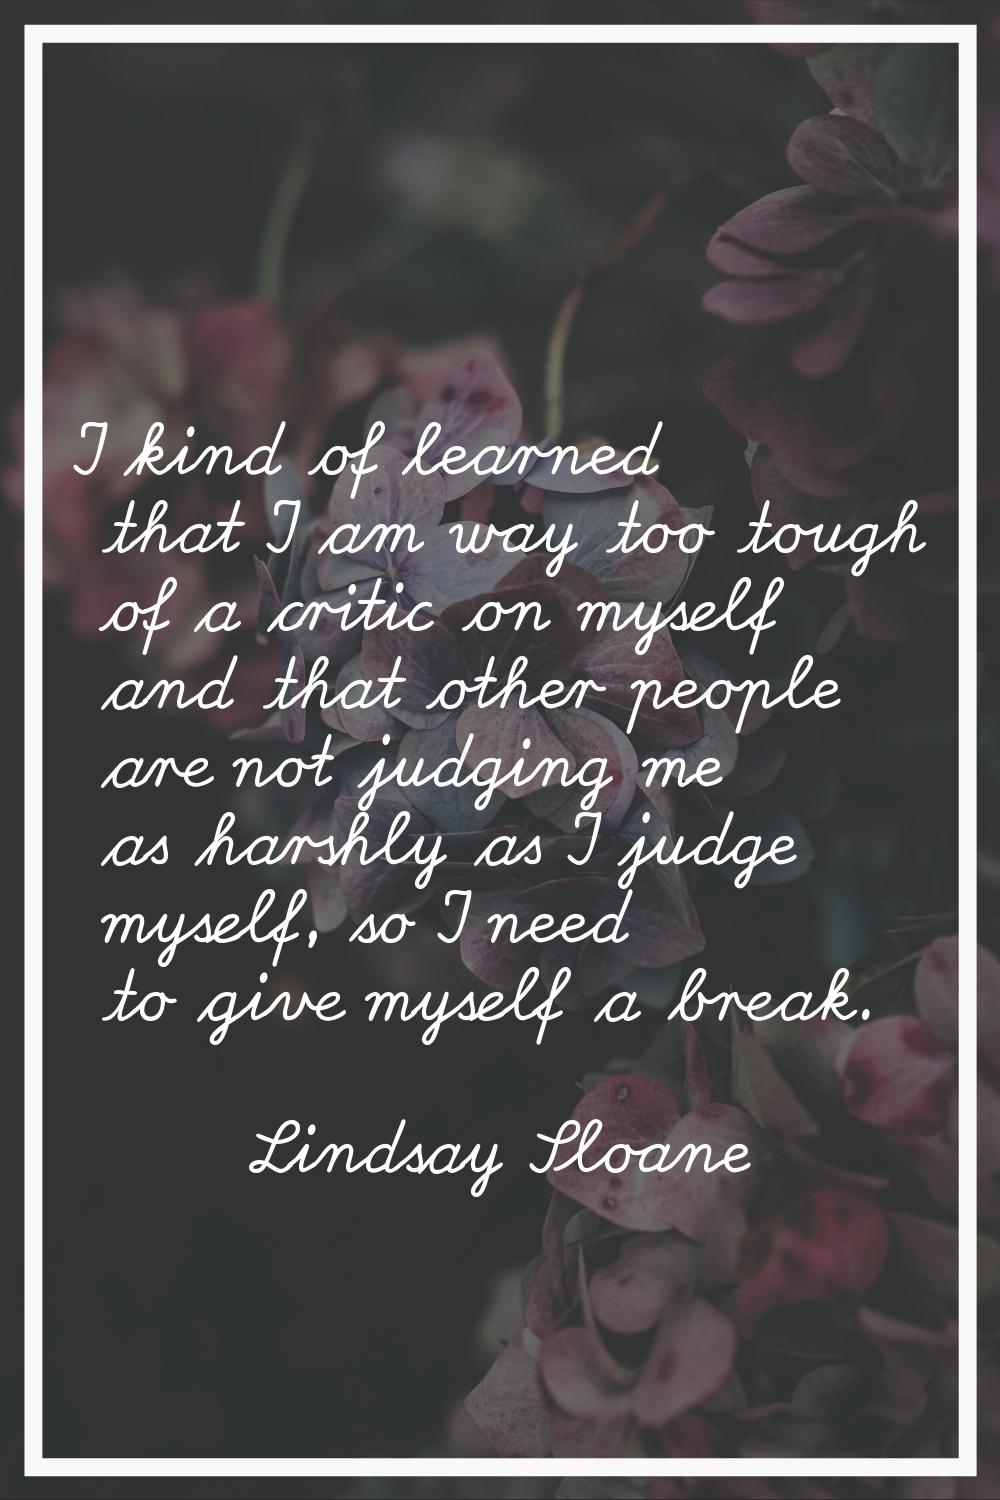 I kind of learned that I am way too tough of a critic on myself and that other people are not judgi